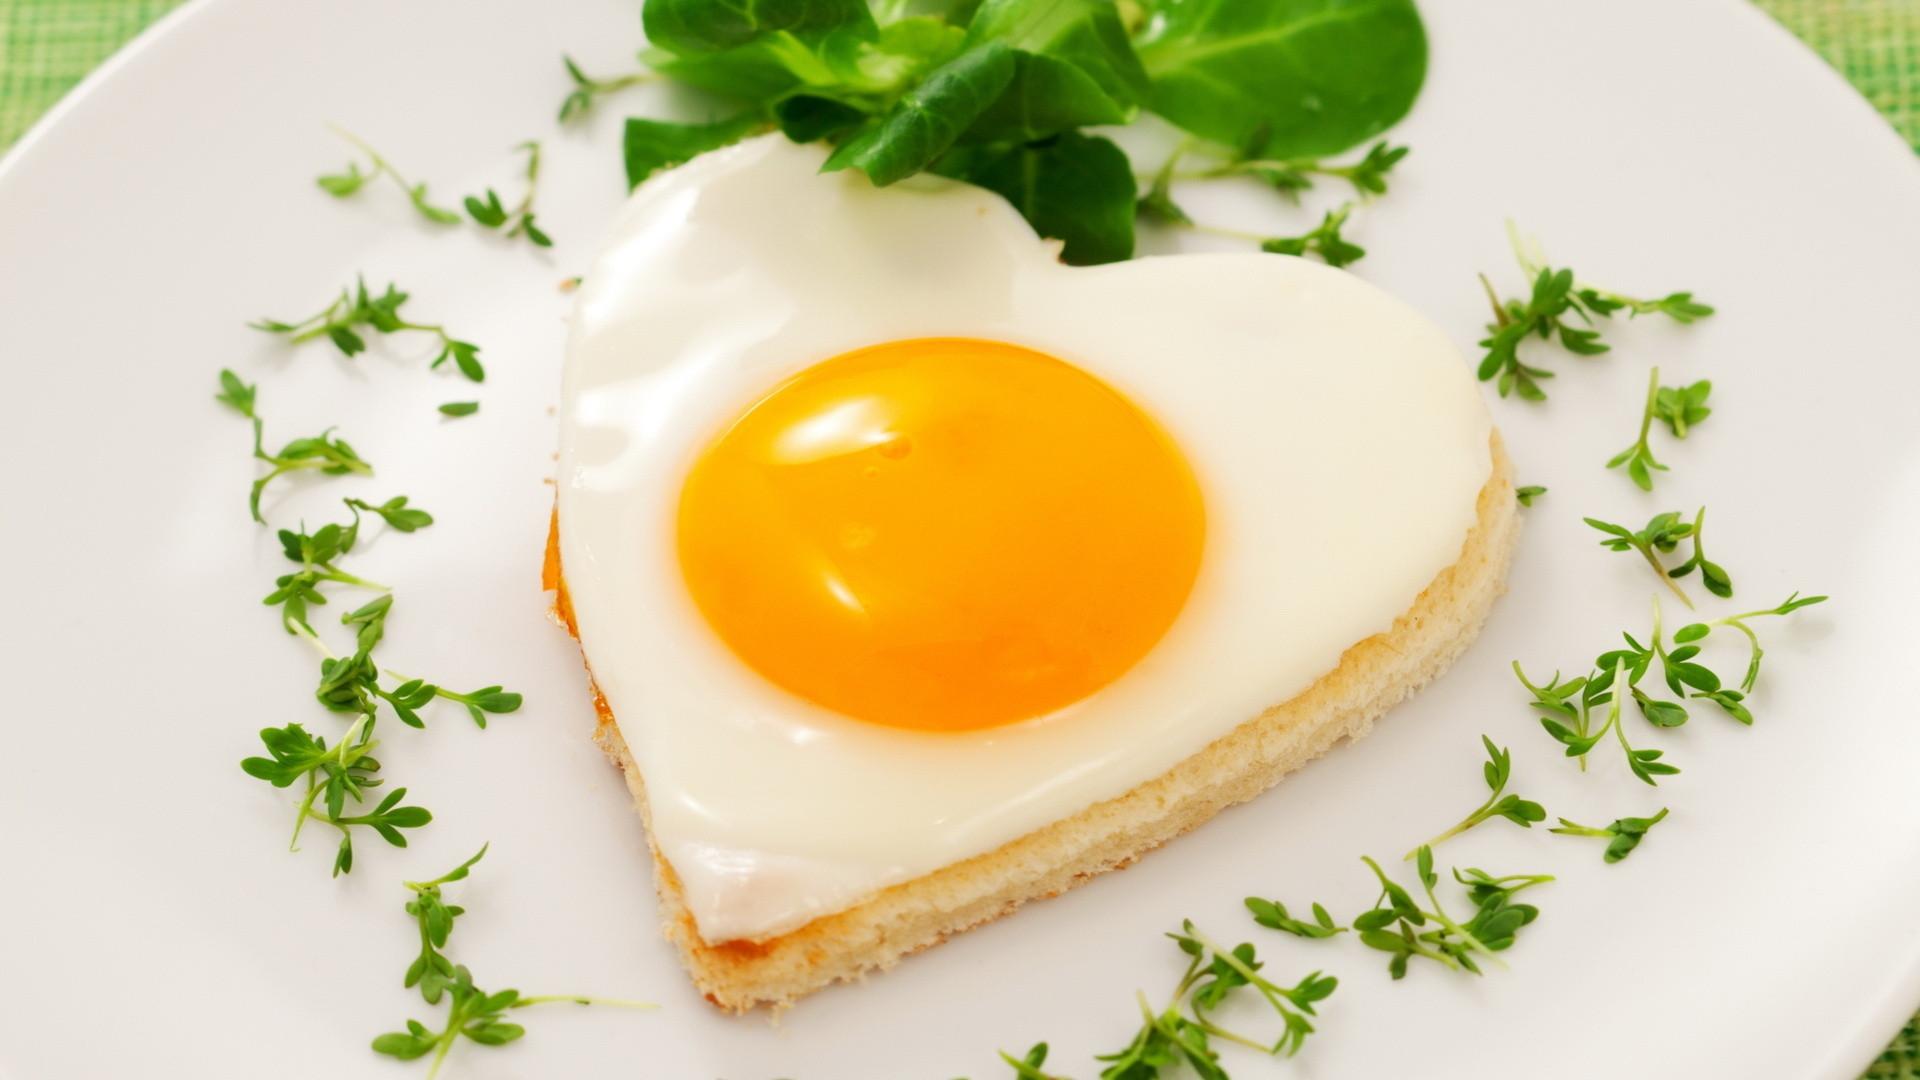 Heart Healthy Breakfast Foods
 7 Foods for a Hearty Dose of Heart Health PokitBlog